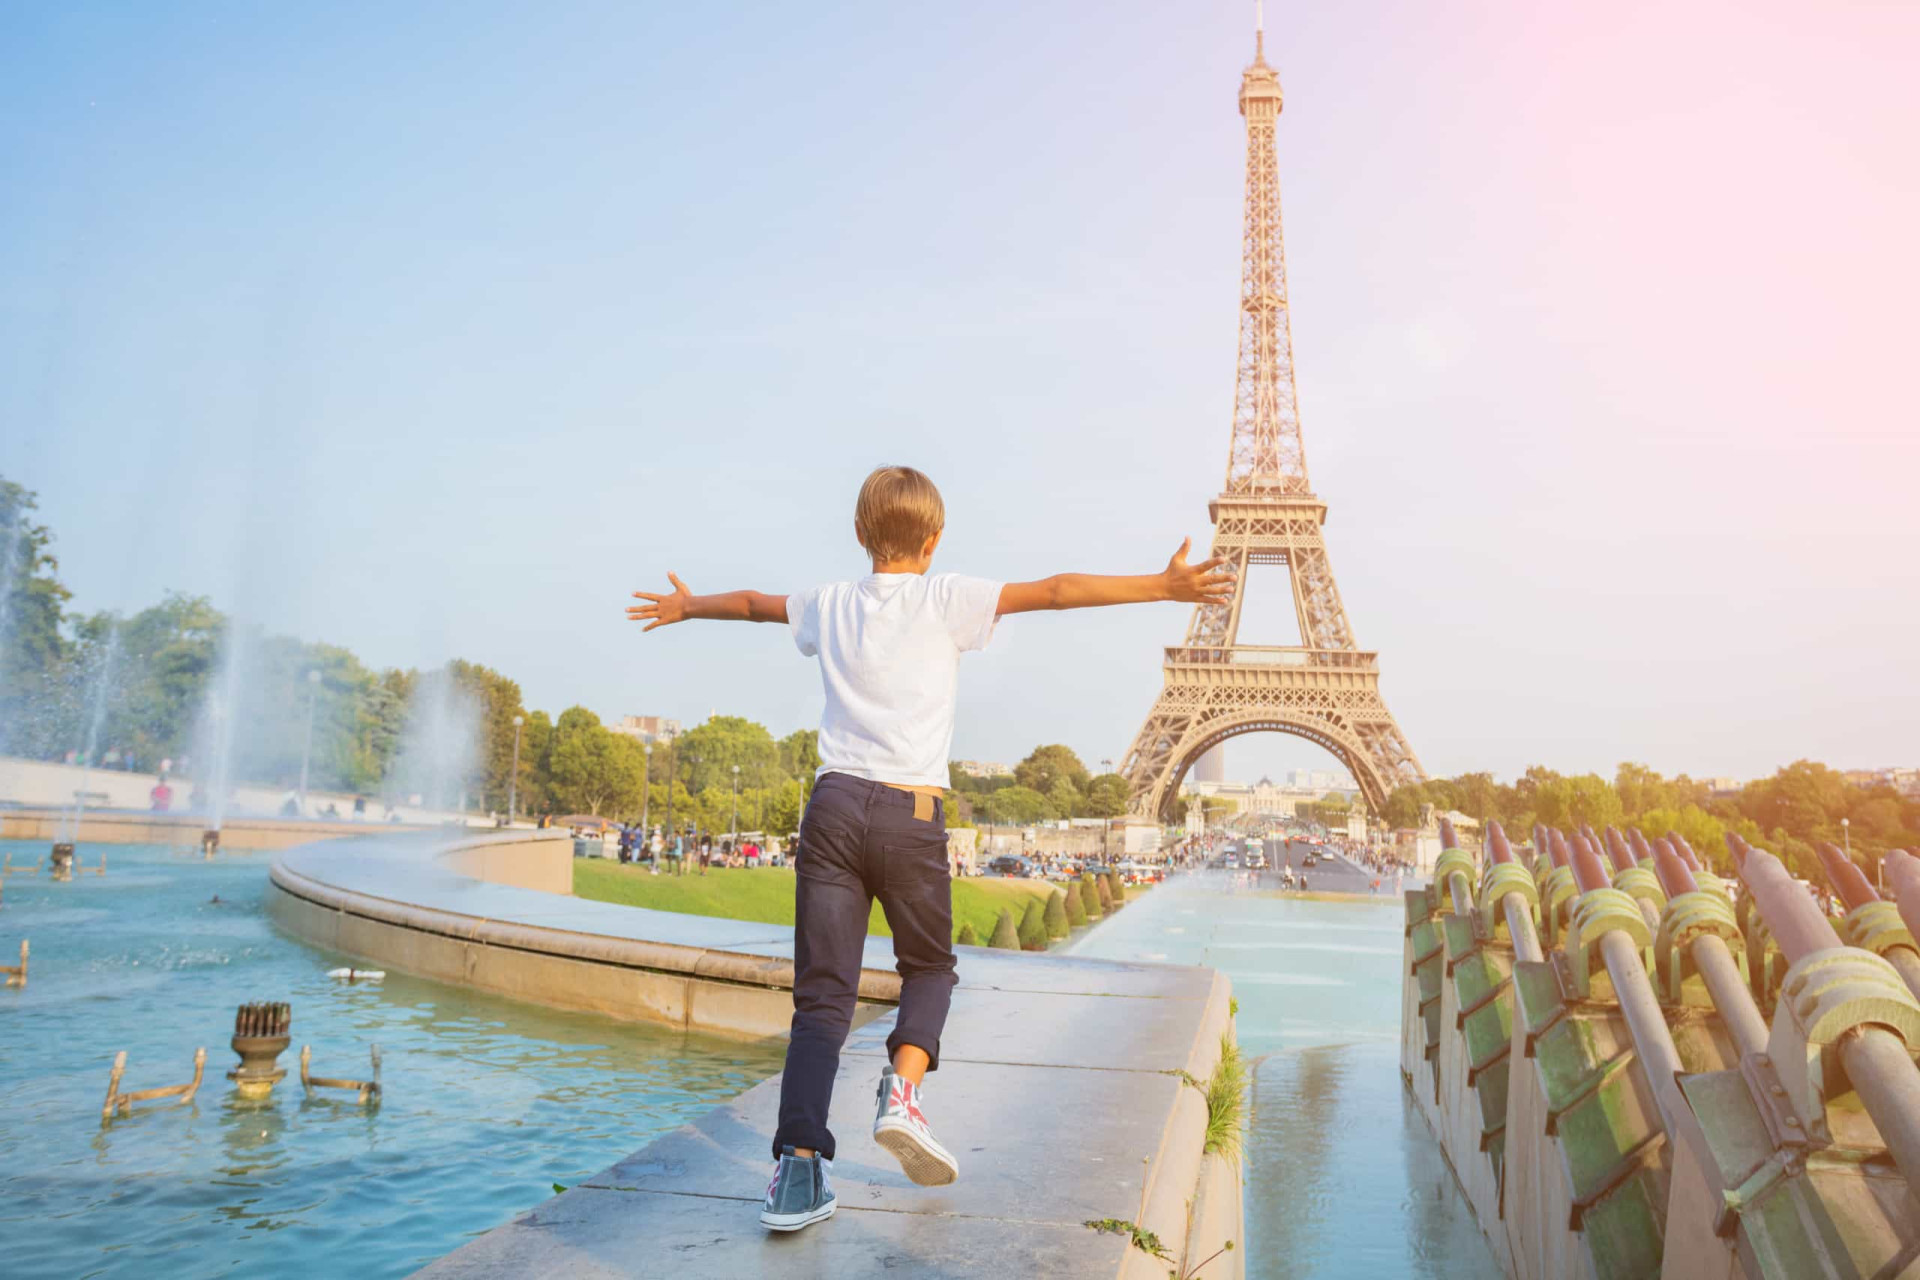 <p>The Eiffel Tower is impressive whether you're five or 55, and it's just one of the big-ticket attractions that make Paris a good bet for a family break. Pack babies into a sling to admire the many galleries and museums, although older children may be more excited about Disneyland Paris!</p><p>You may also like:<a href="https://www.starsinsider.com/n/457876?utm_source=msn.com&utm_medium=display&utm_campaign=referral_description&utm_content=481299v3en-en"> Funniest sayings from around the world</a></p>